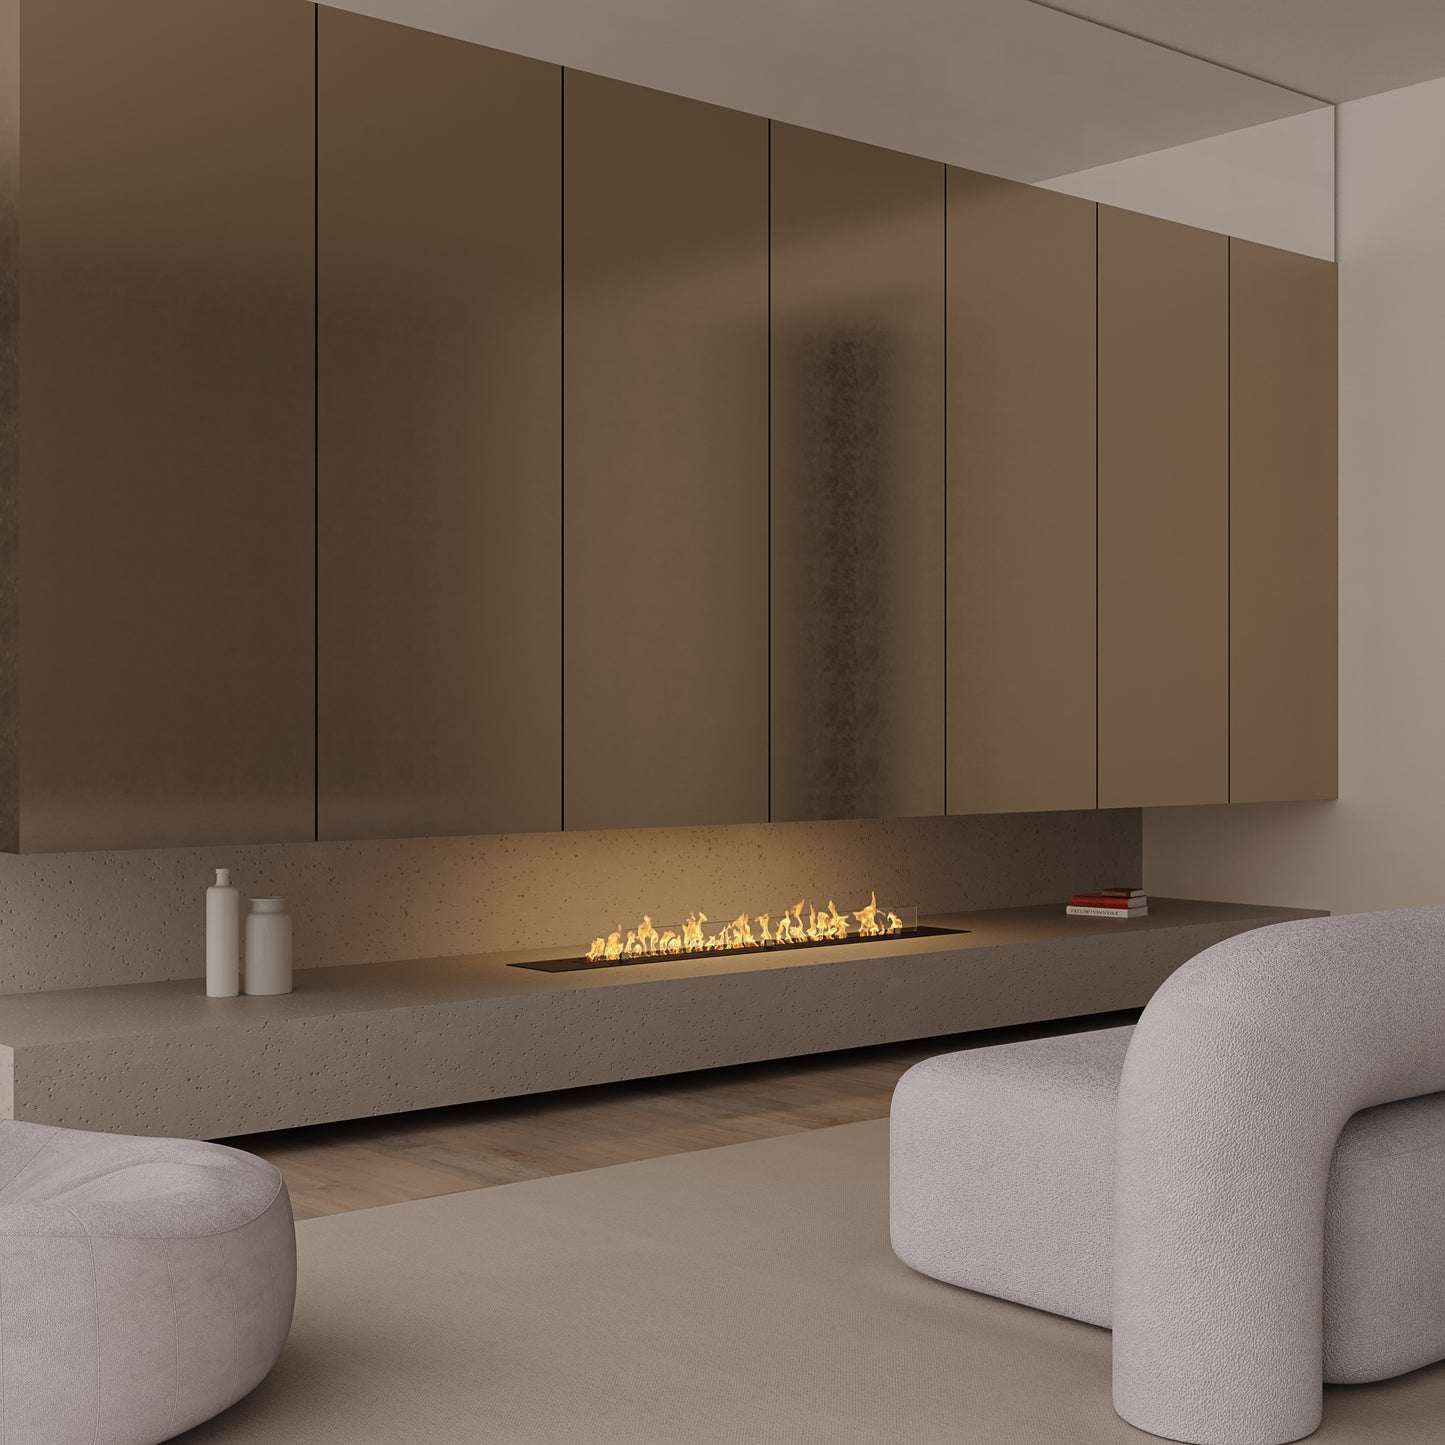 Crea7ionEVOPlus  Insert in fireplace open on three sides in modern living room